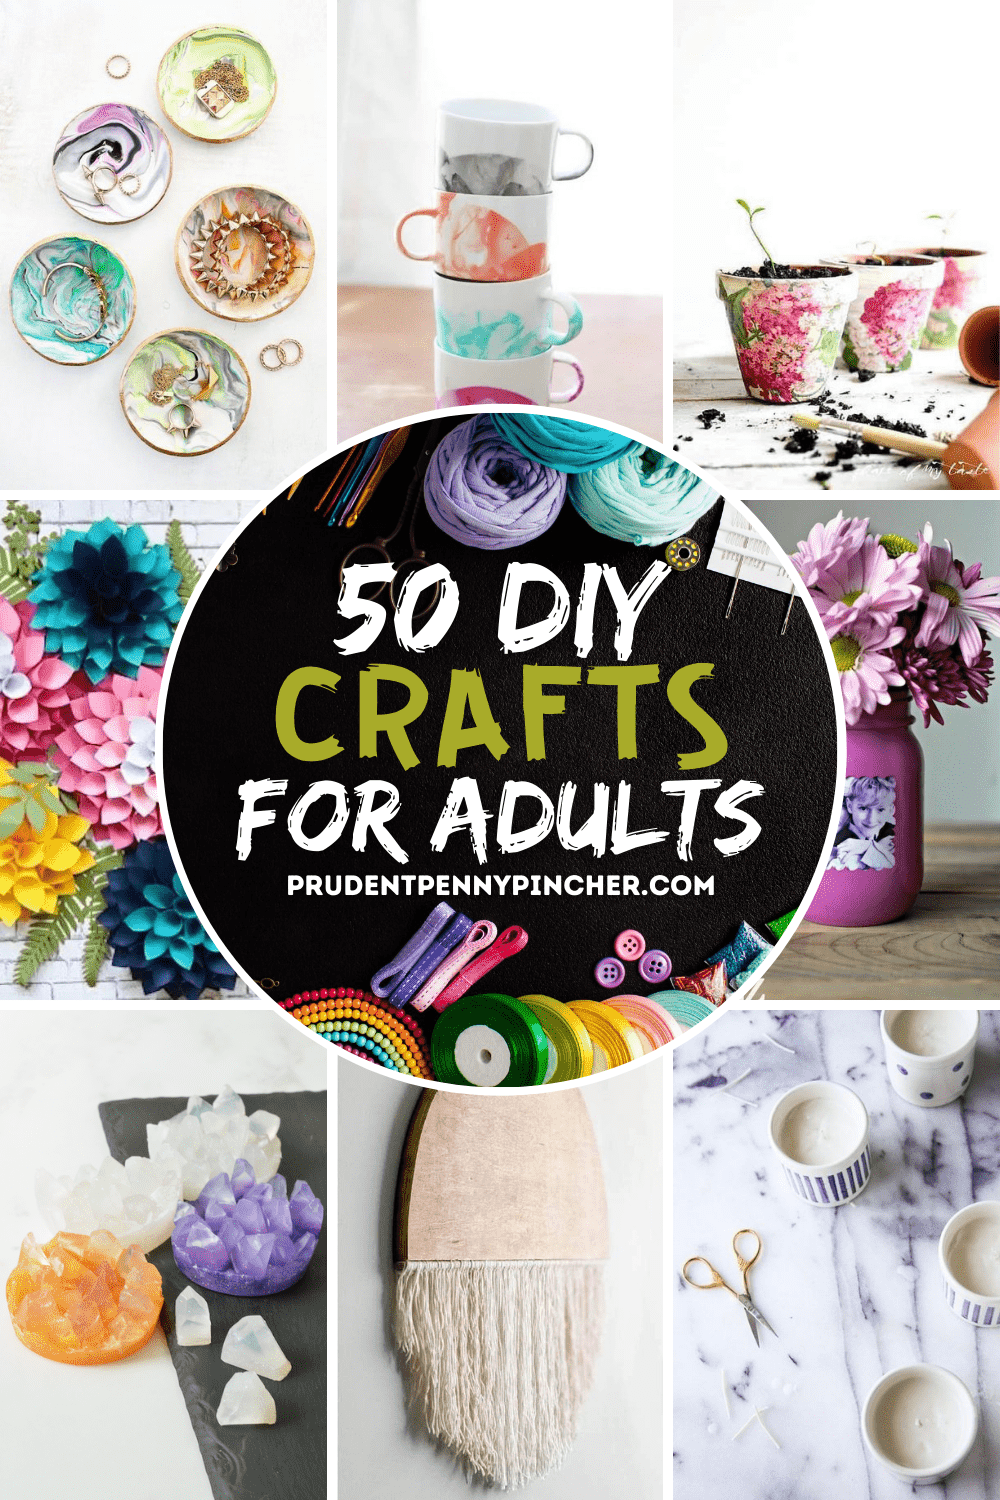 Tapping Into the Creativity with Adult Craft Kits